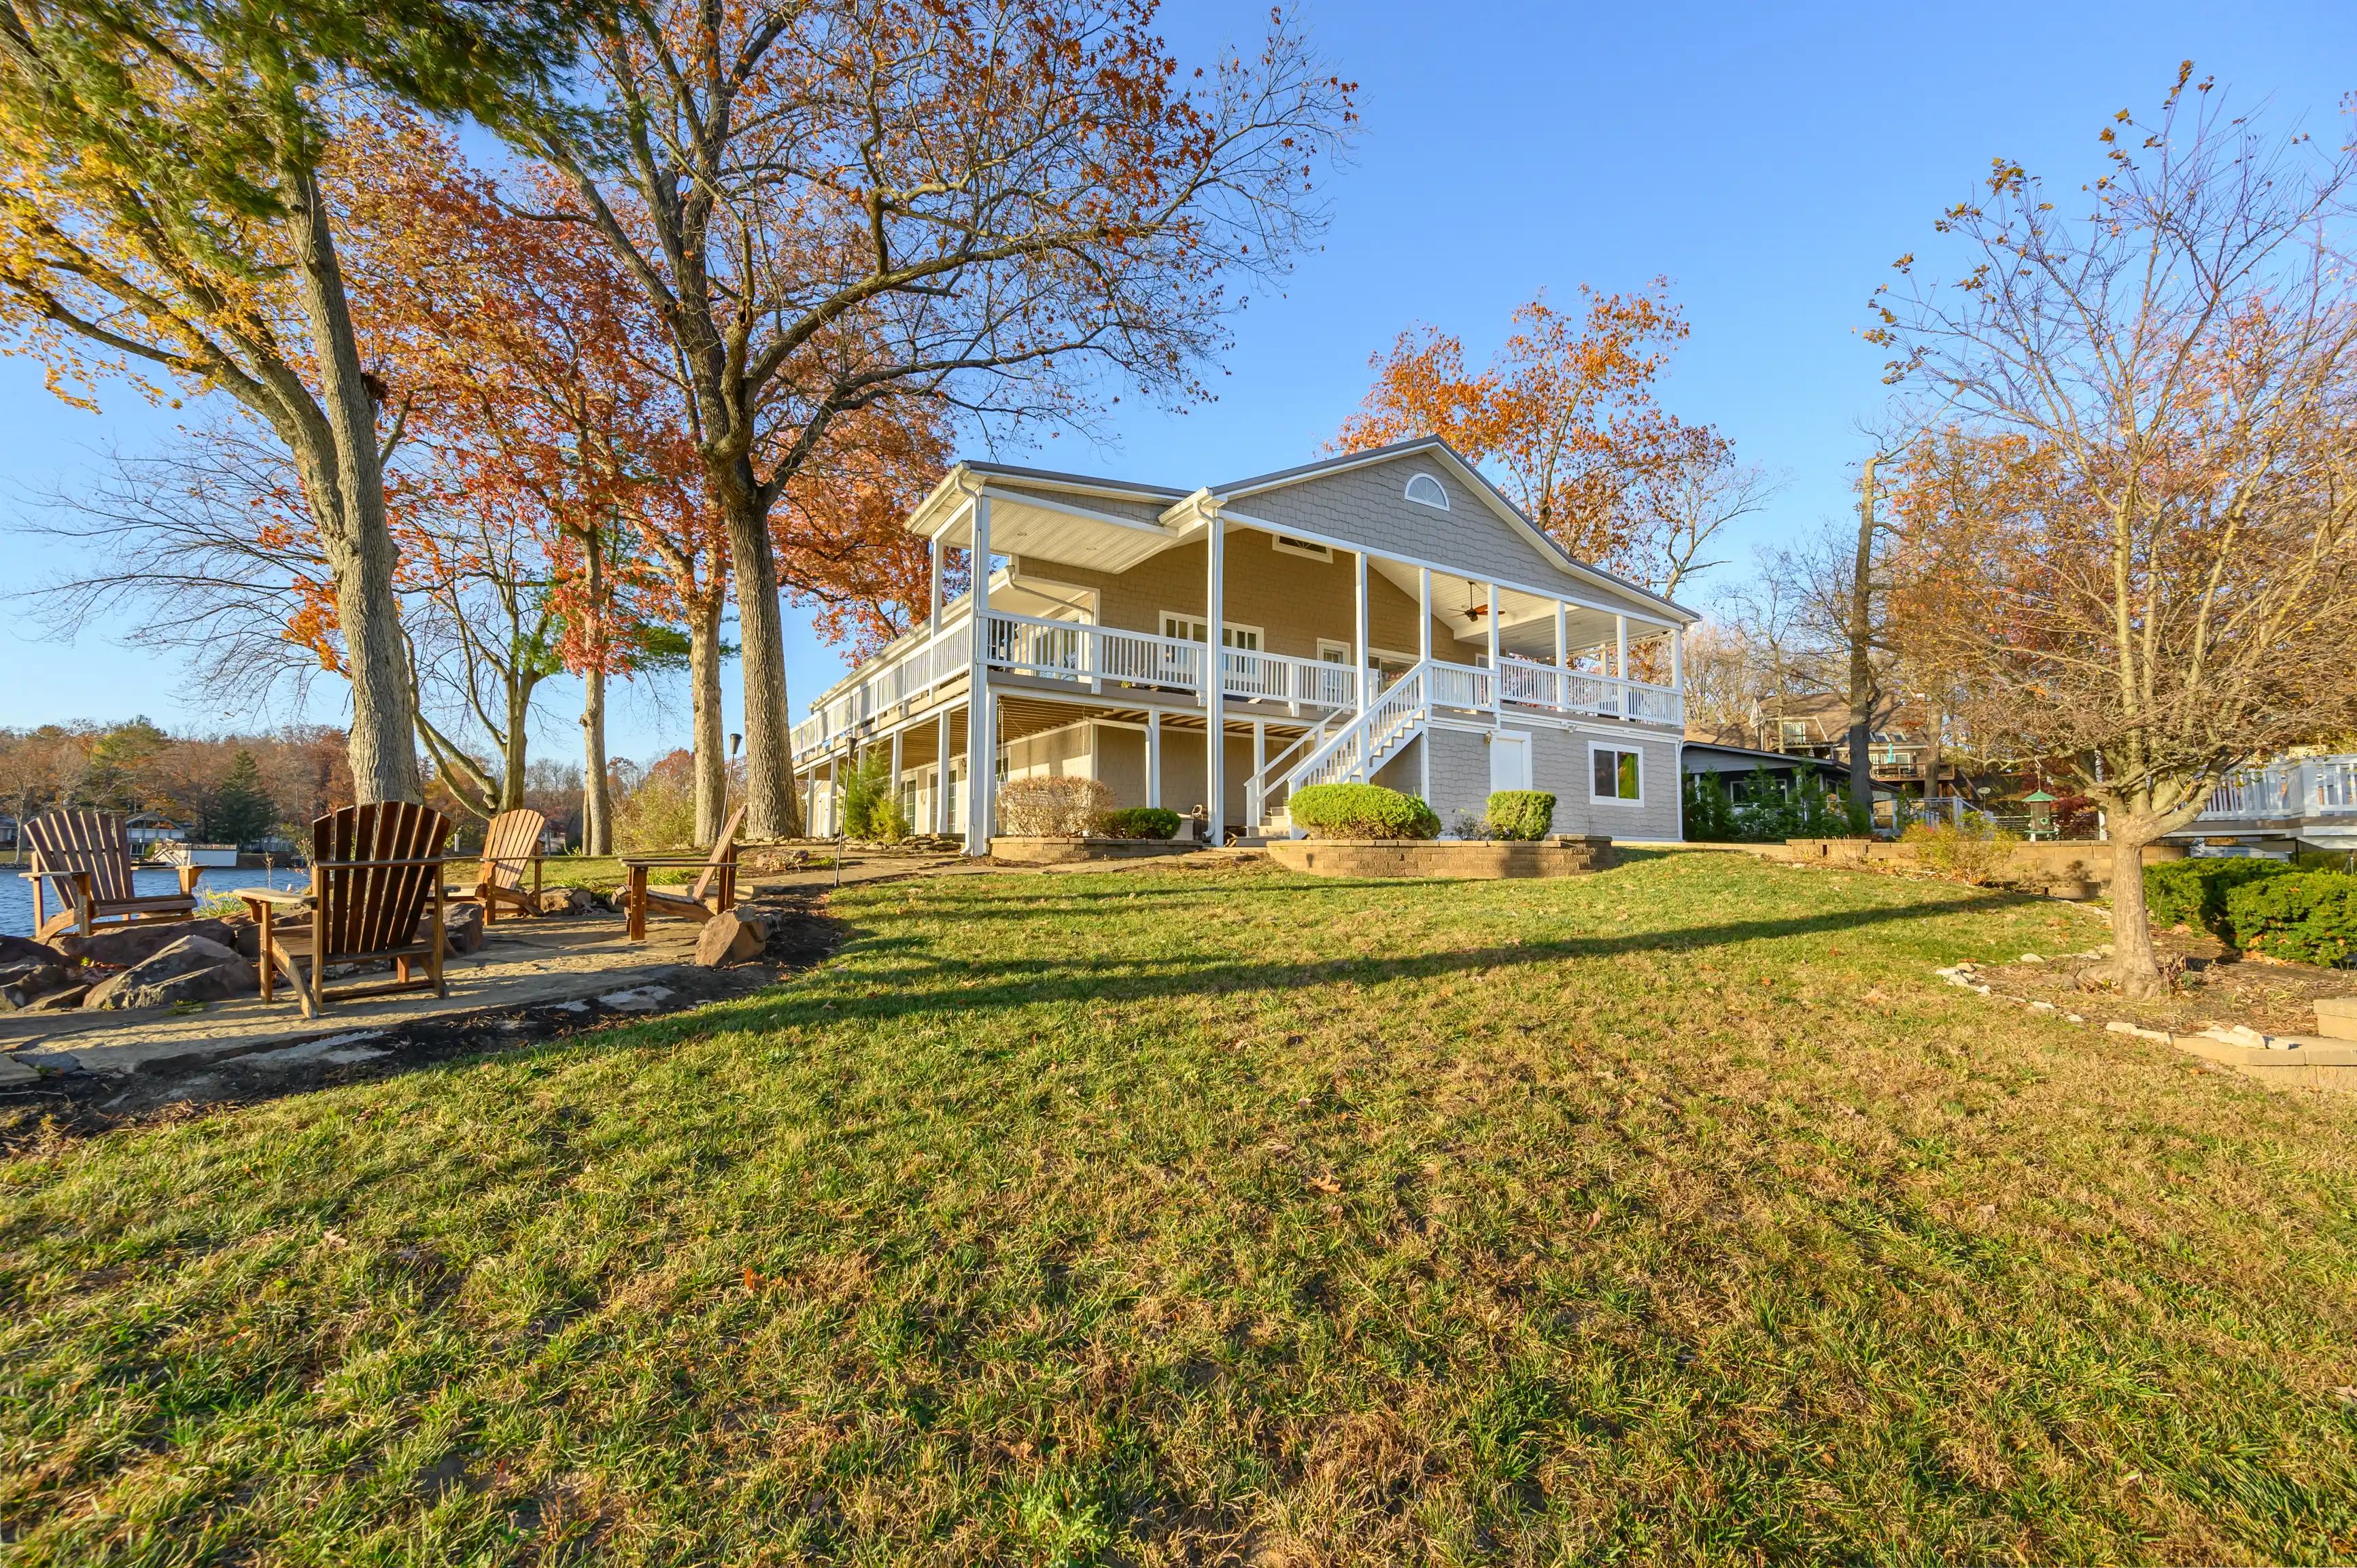 Two-story house with a wrap-around porch surrounded by autumn trees with Adirondack chairs overlooking a lake.